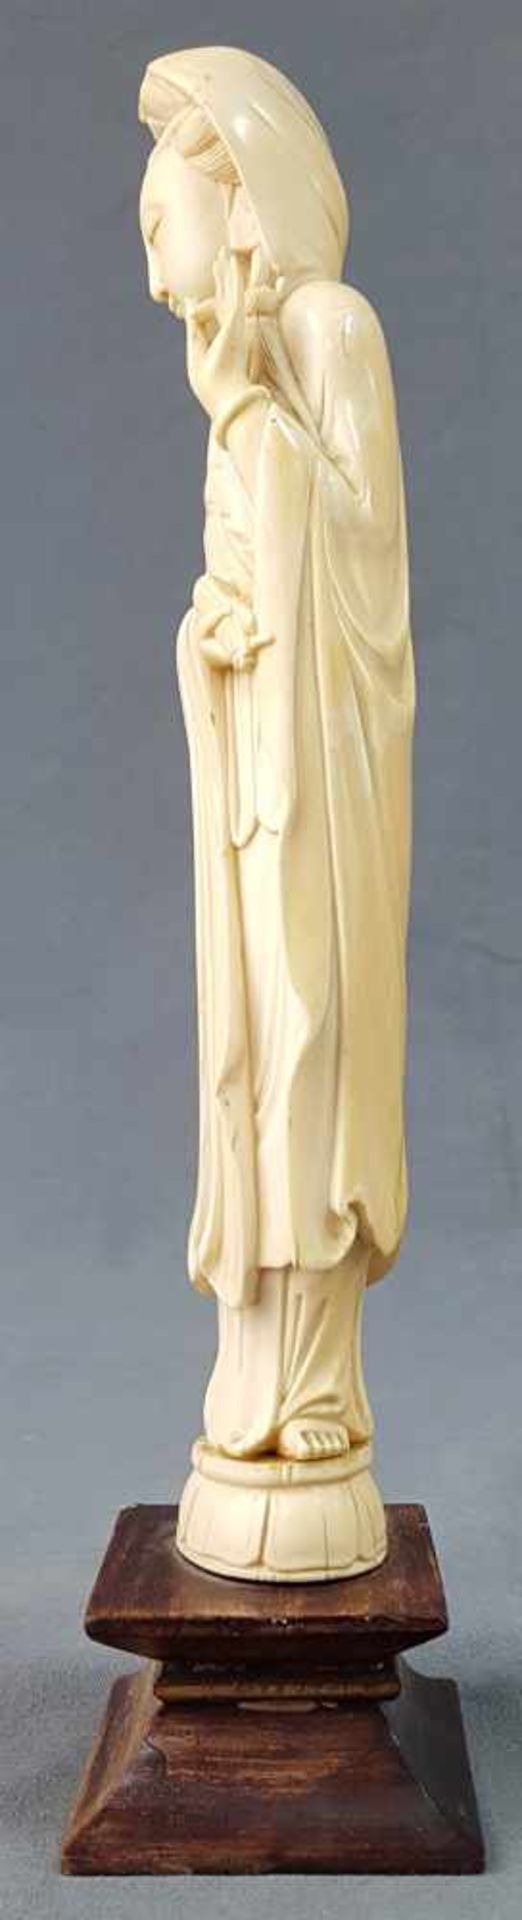 Lady with a blessing hand. China / Japan. Ivory. Old, around 1920. - Image 2 of 6